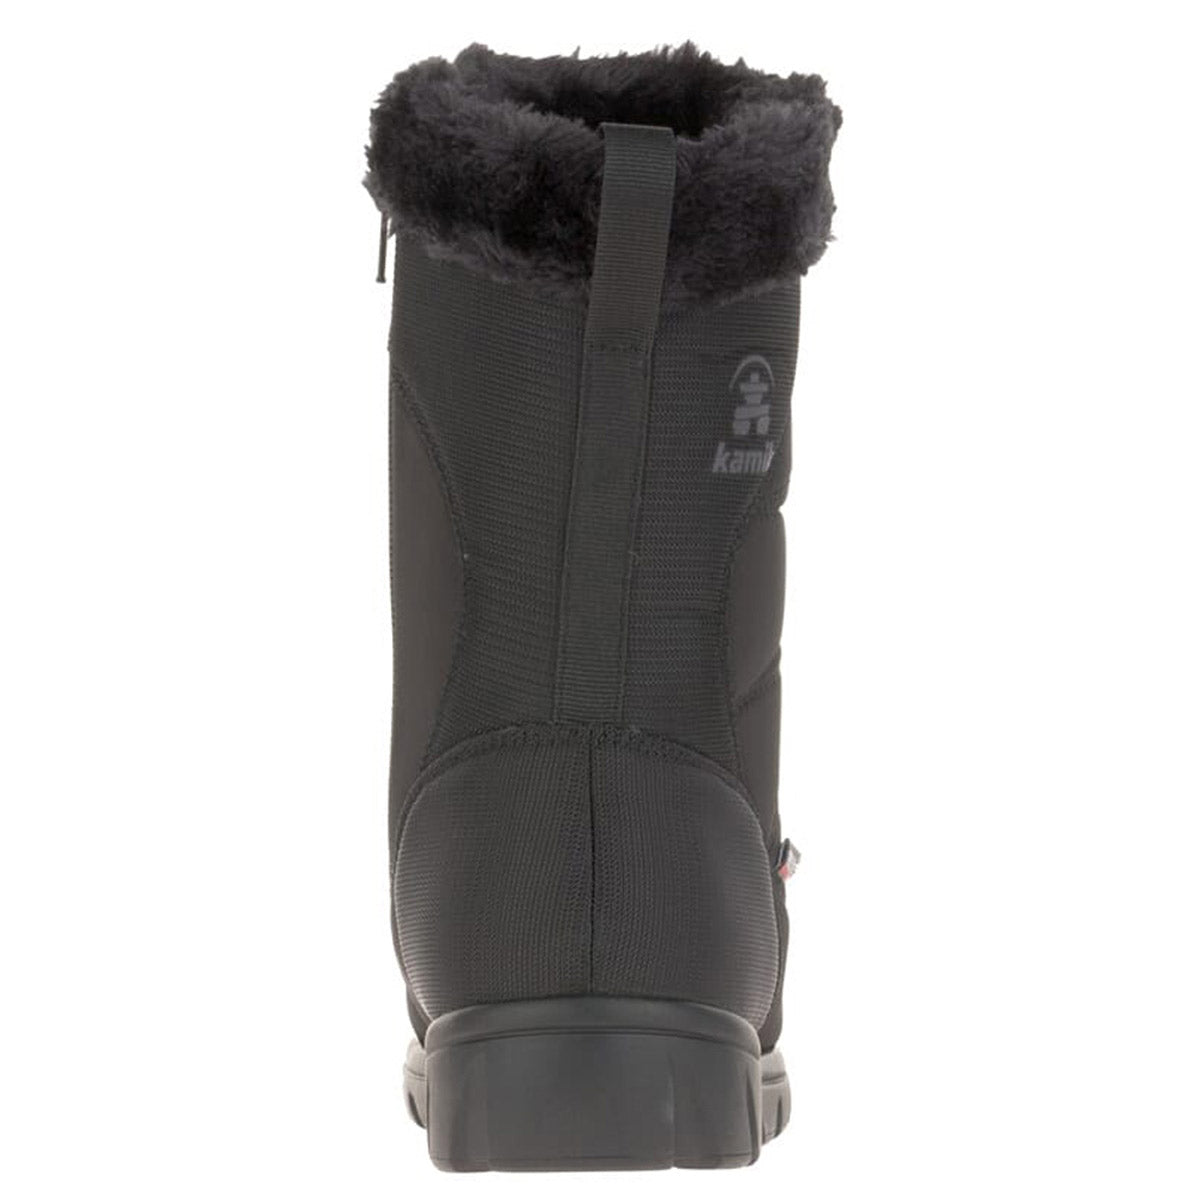 Rear view of a Kamik Hannah Zip Wide Width Black - Womens winter boot with a furry collar, waterproof construction, and logo on the heel.